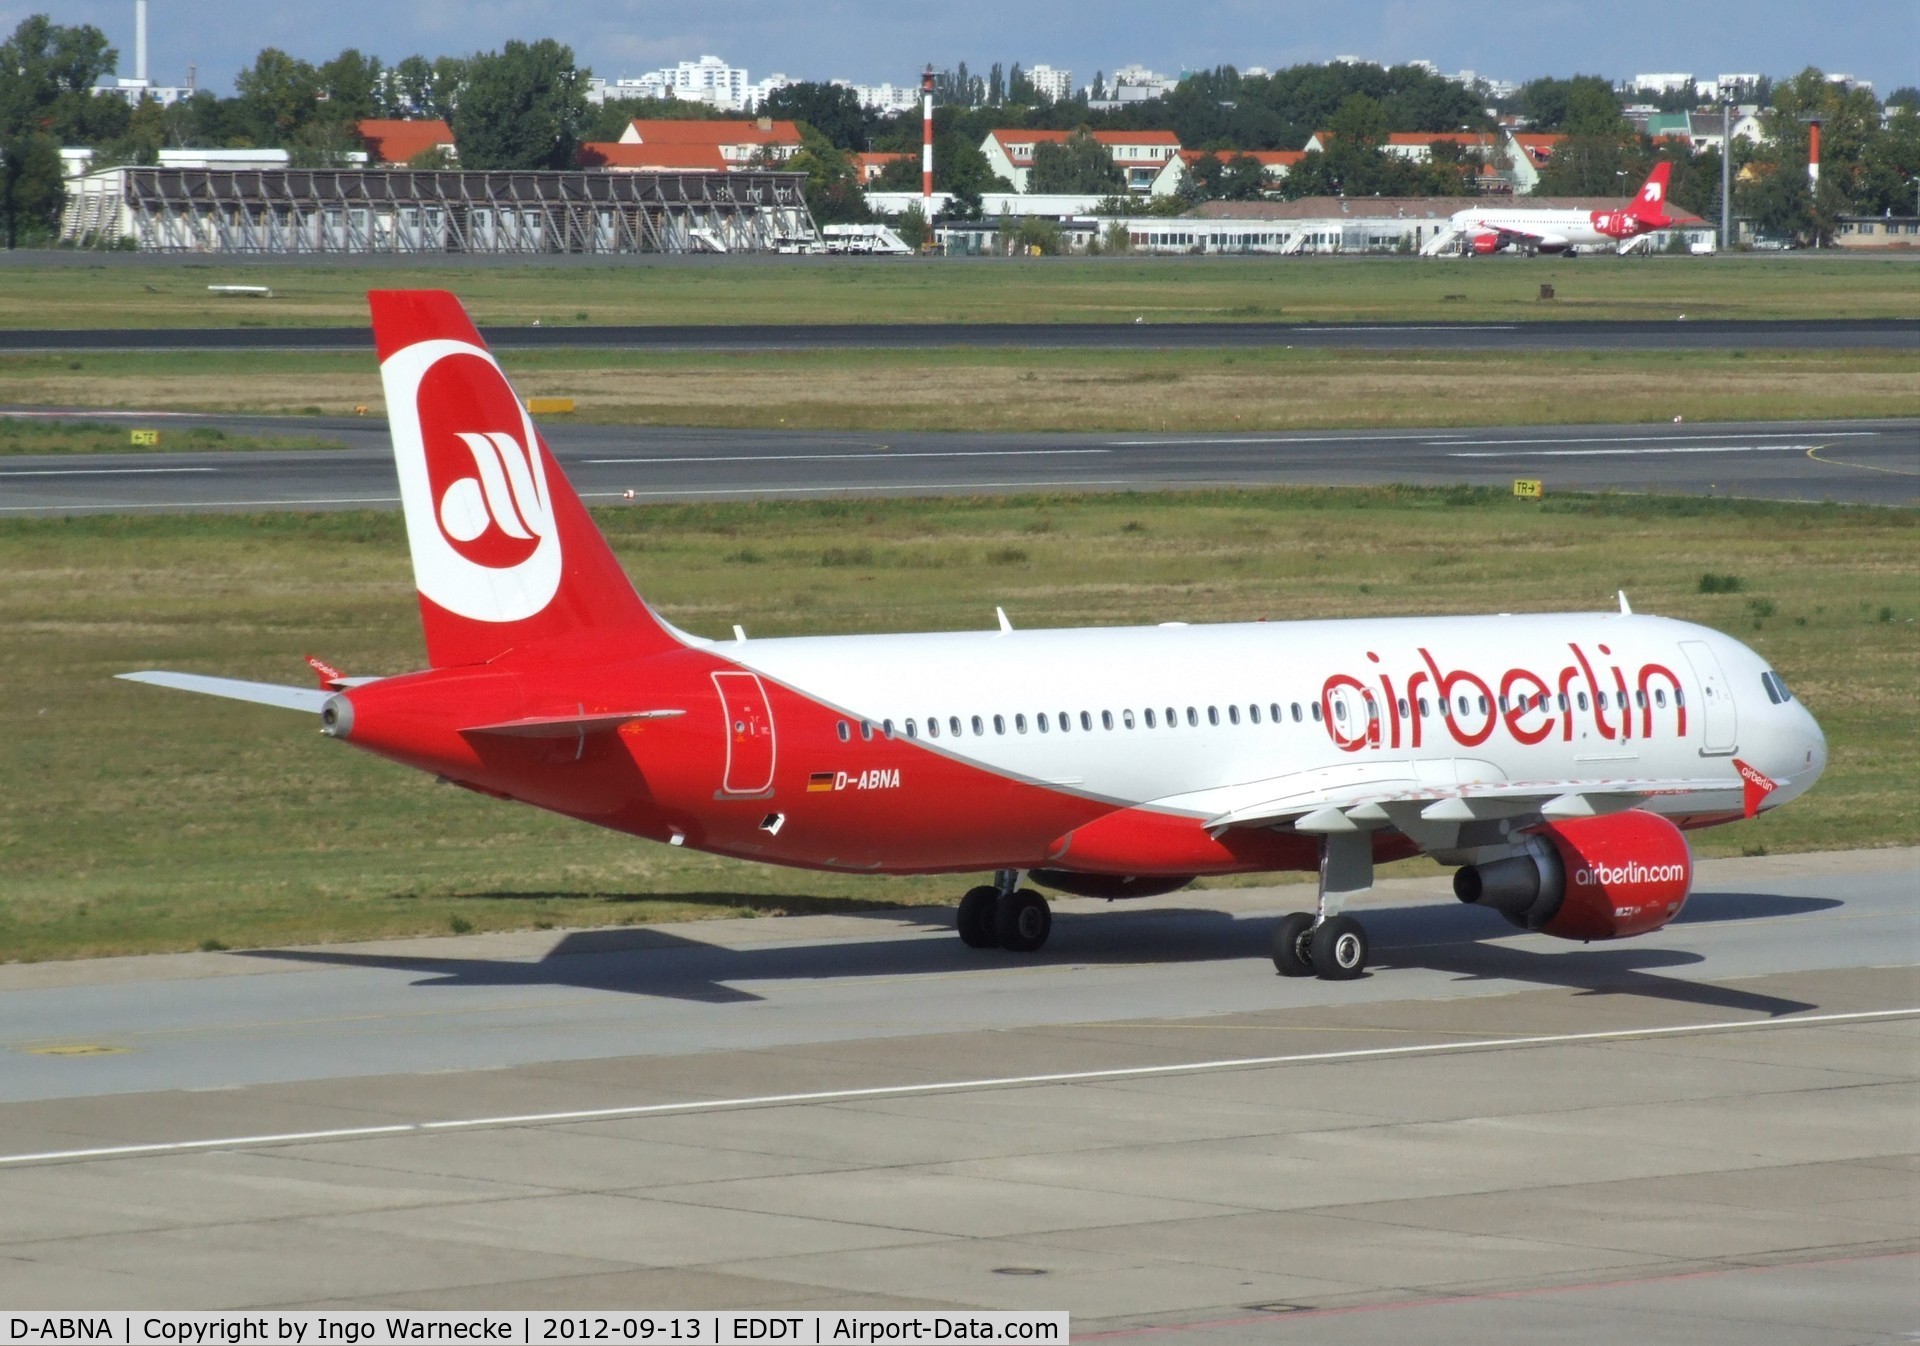 D-ABNA, 2012 Airbus A320-214 C/N 5191, Airbus A320-214 of airberlin at Berlin-Tegel airport